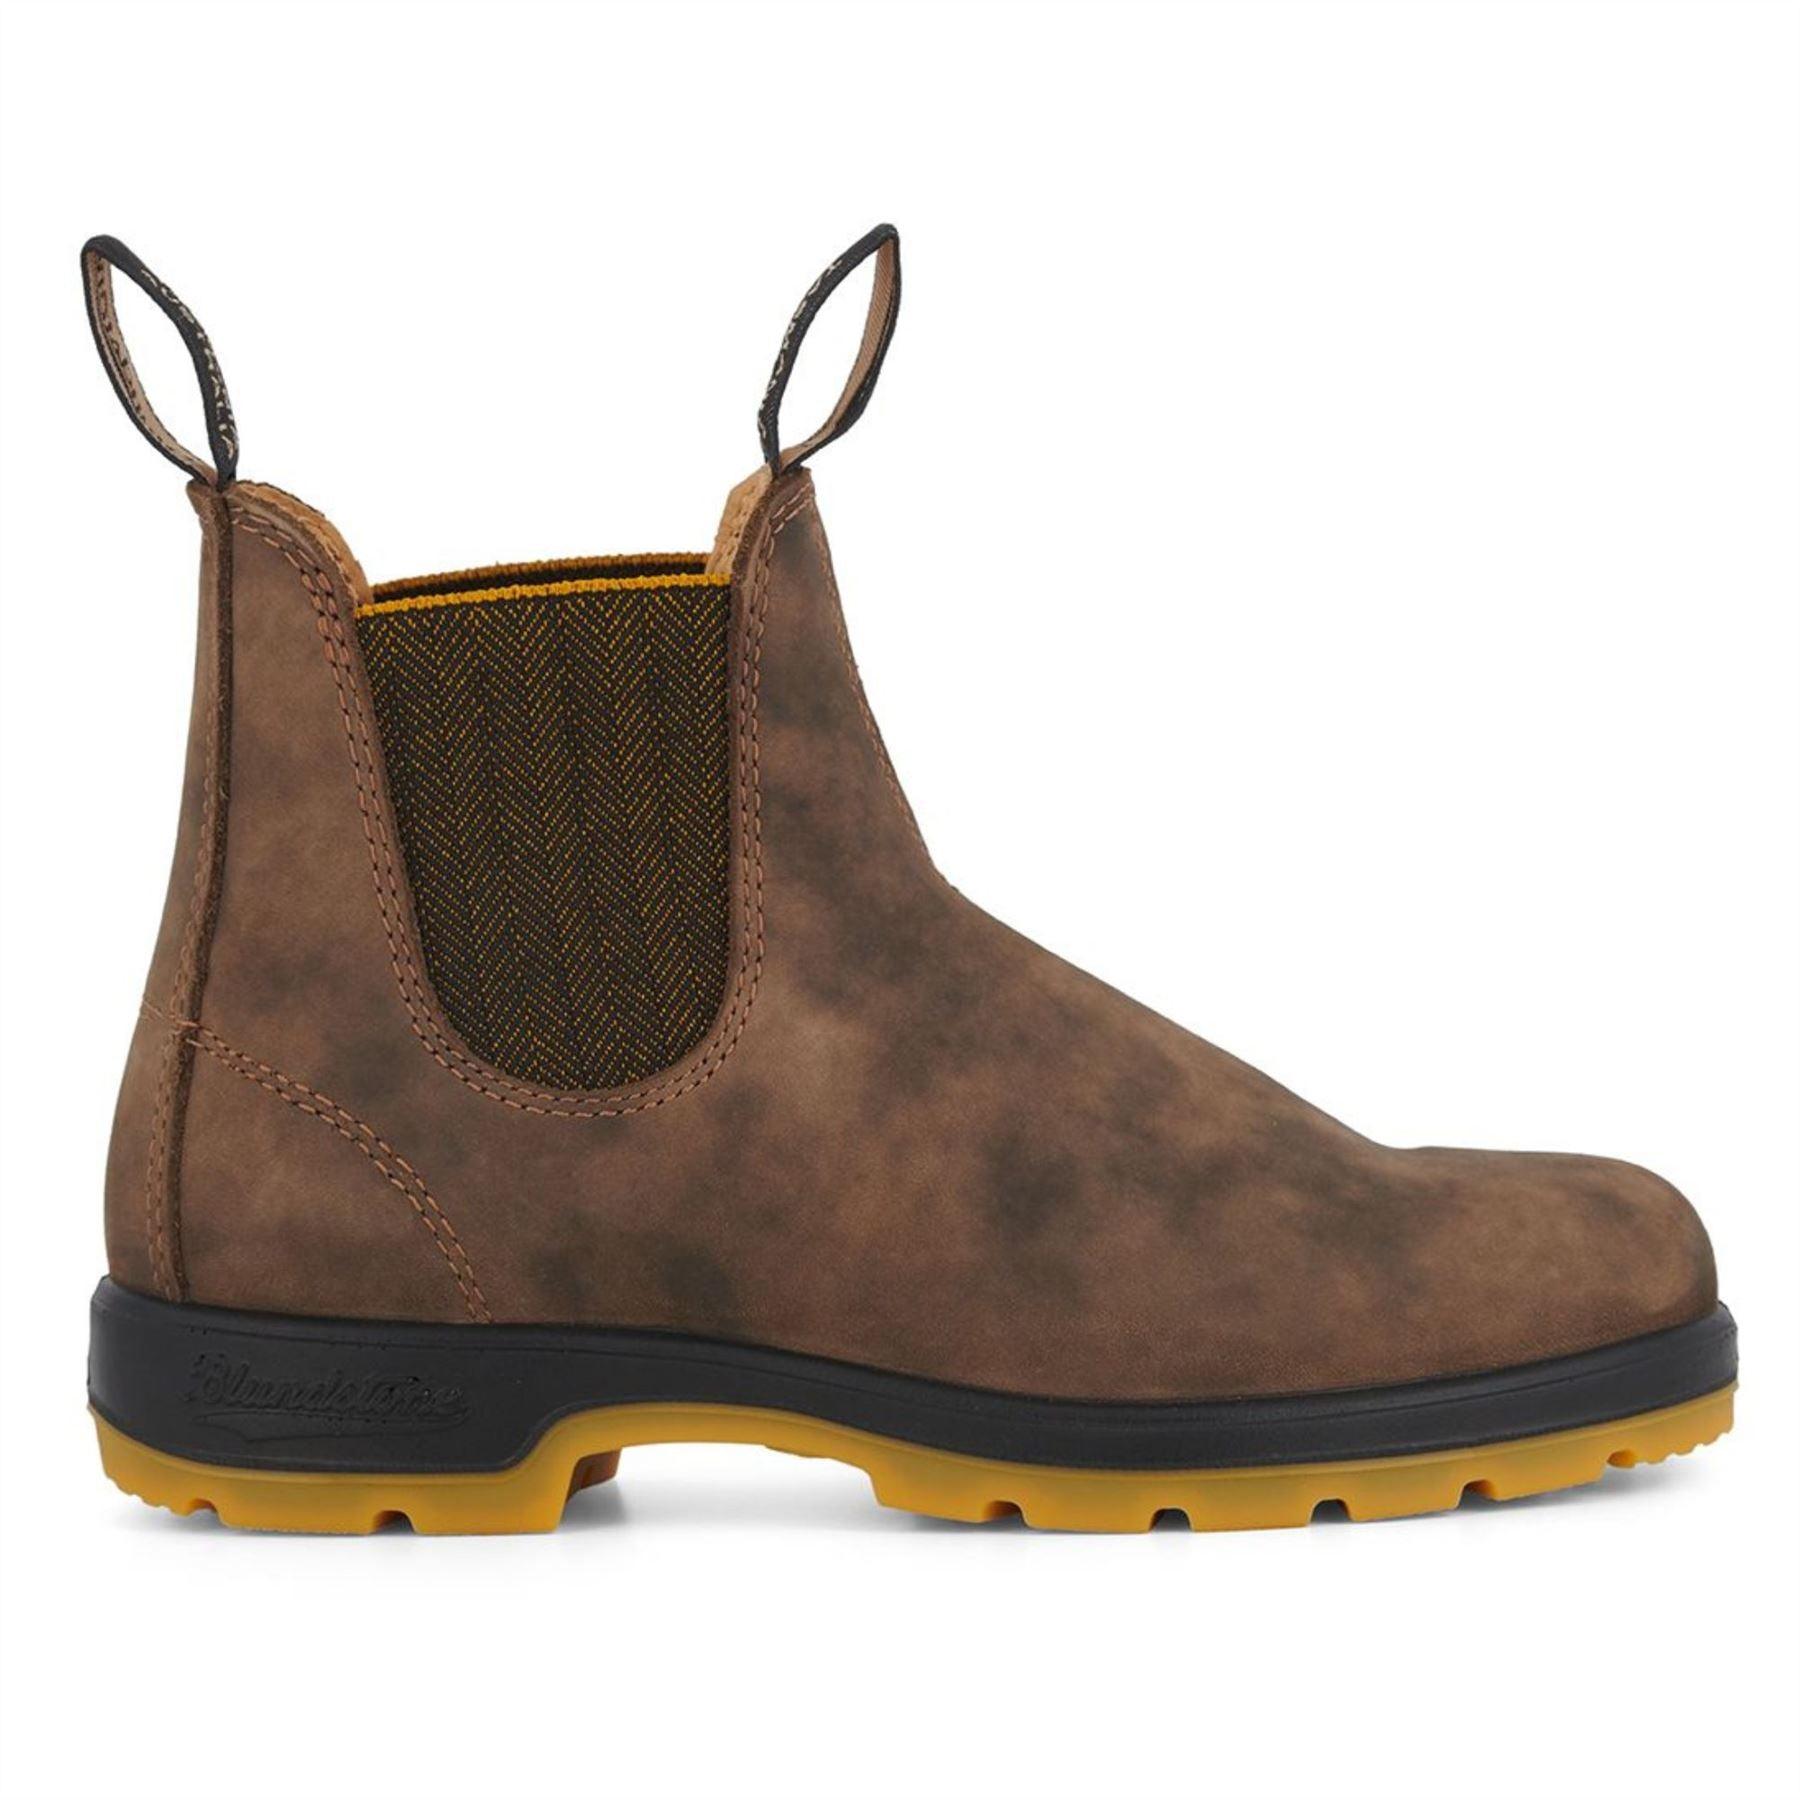 Blundstone Boots for Men